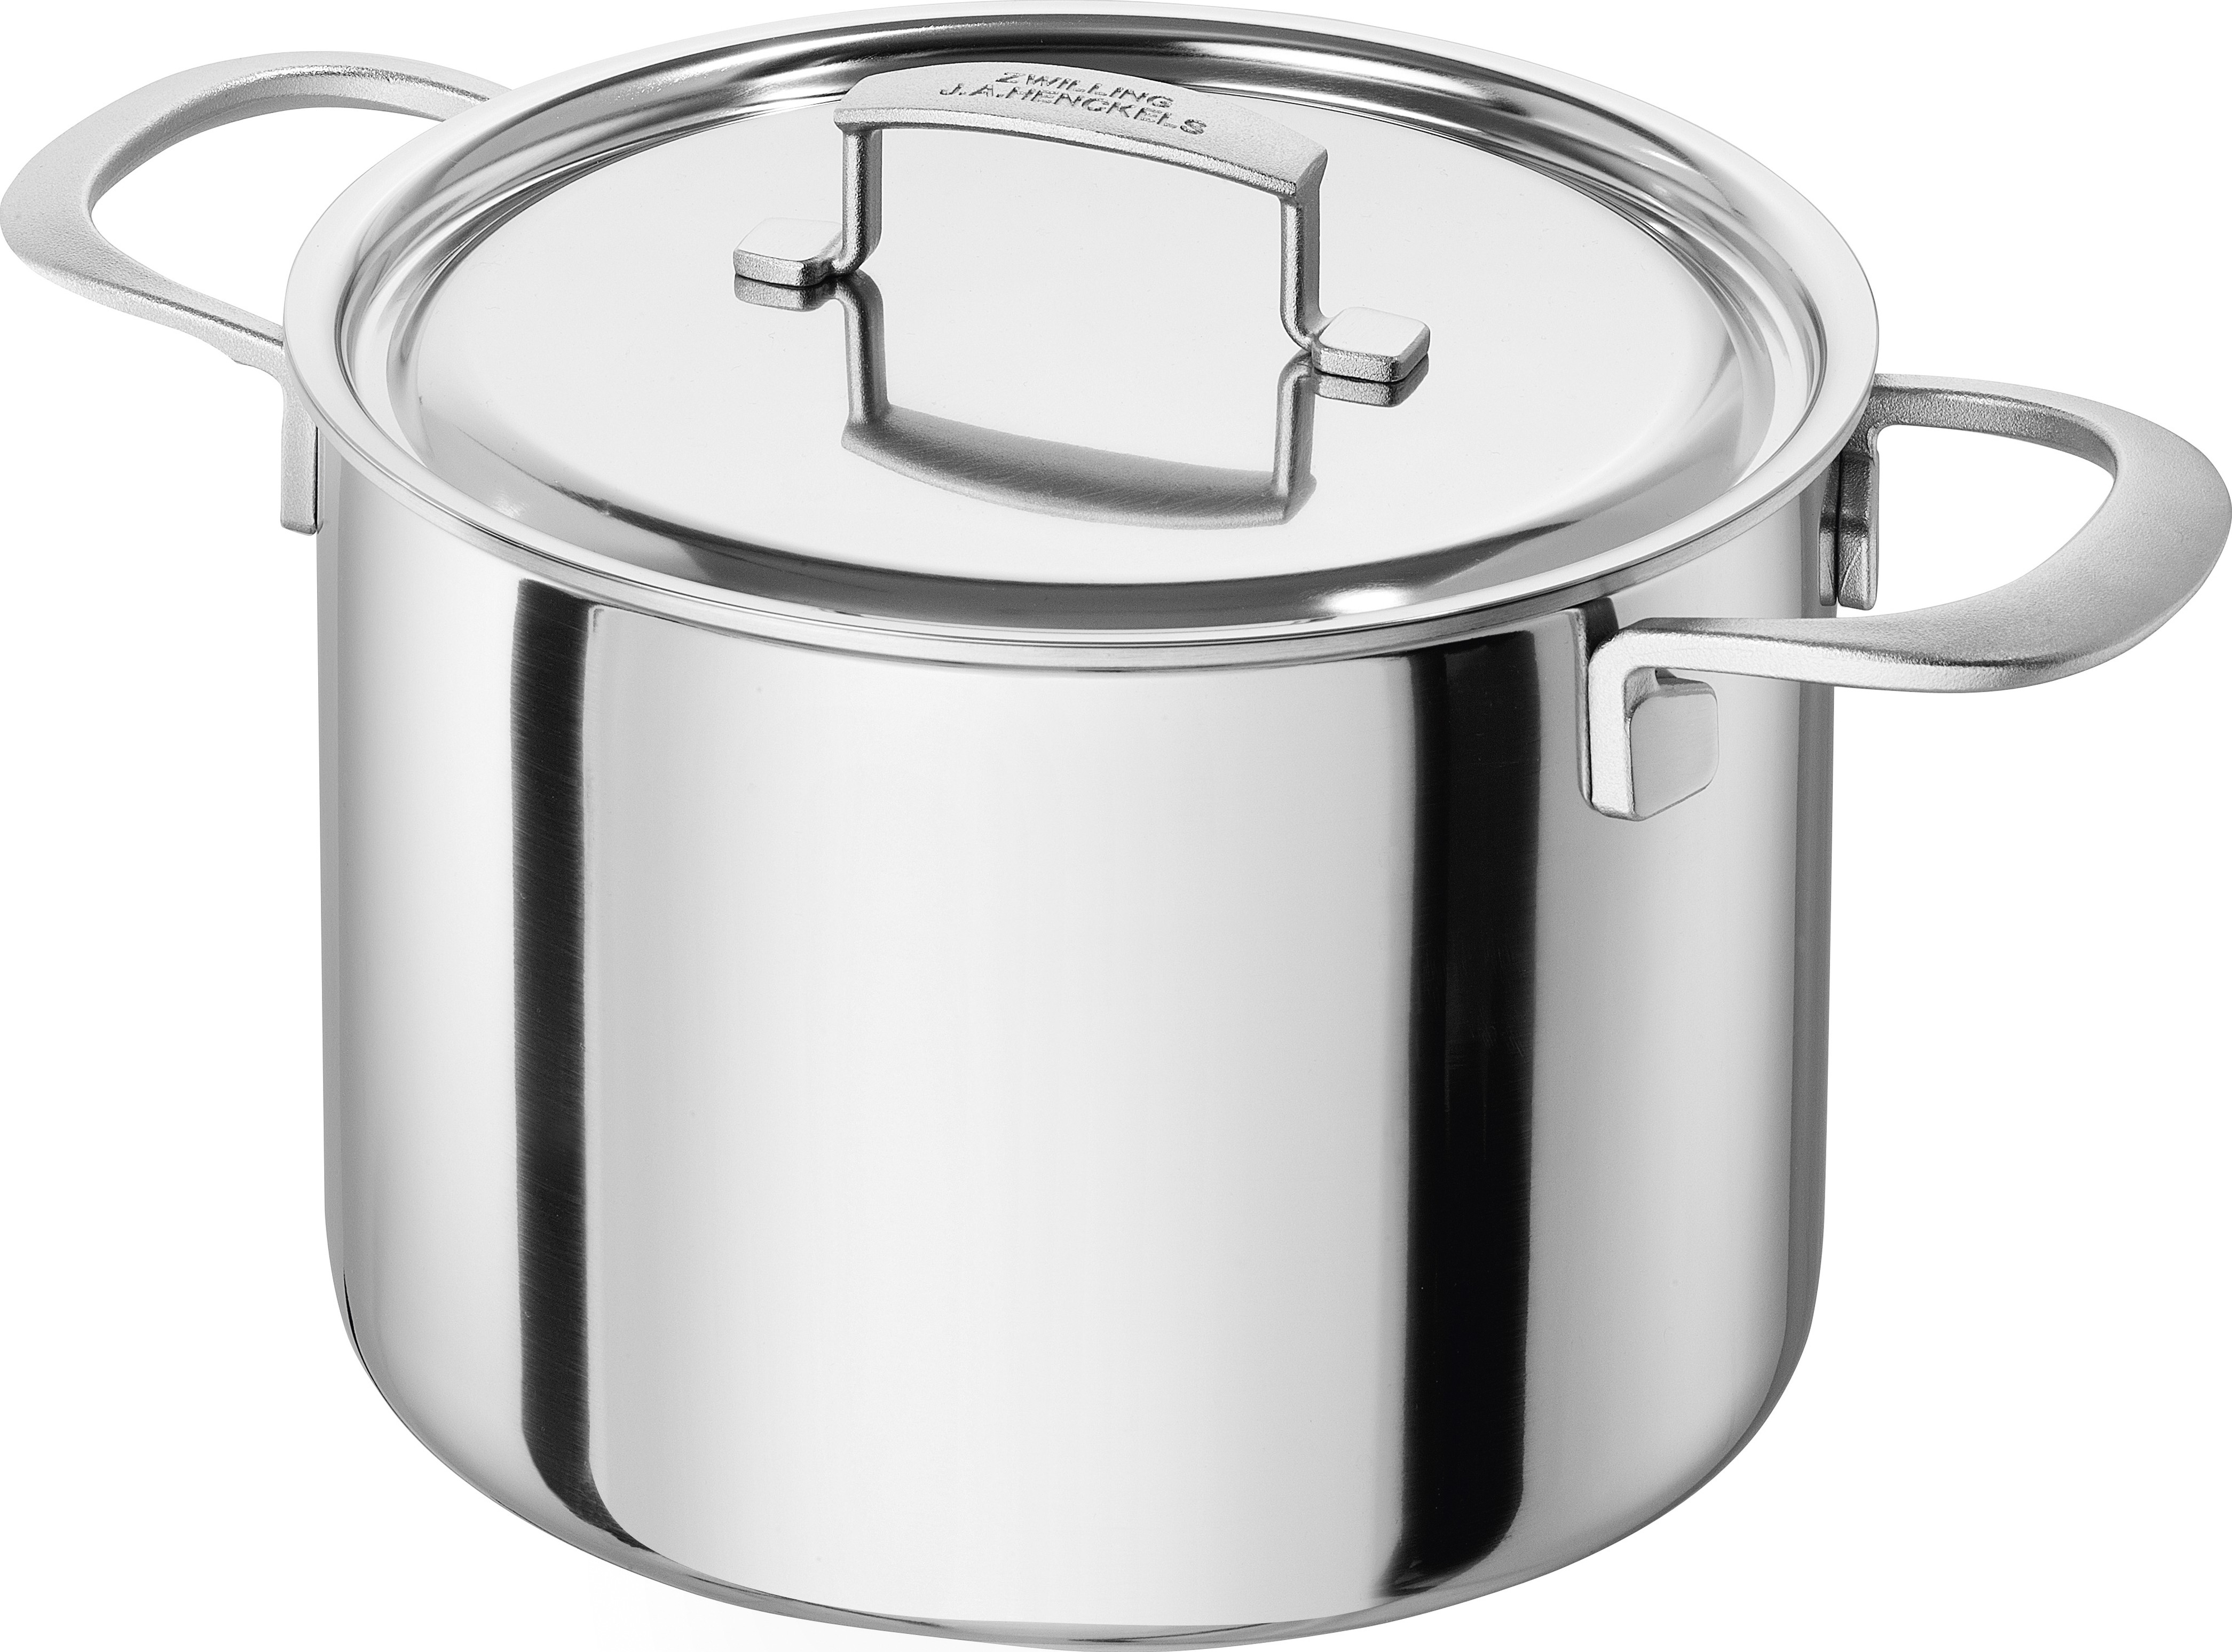 Pot stainless steel, 6,6 L